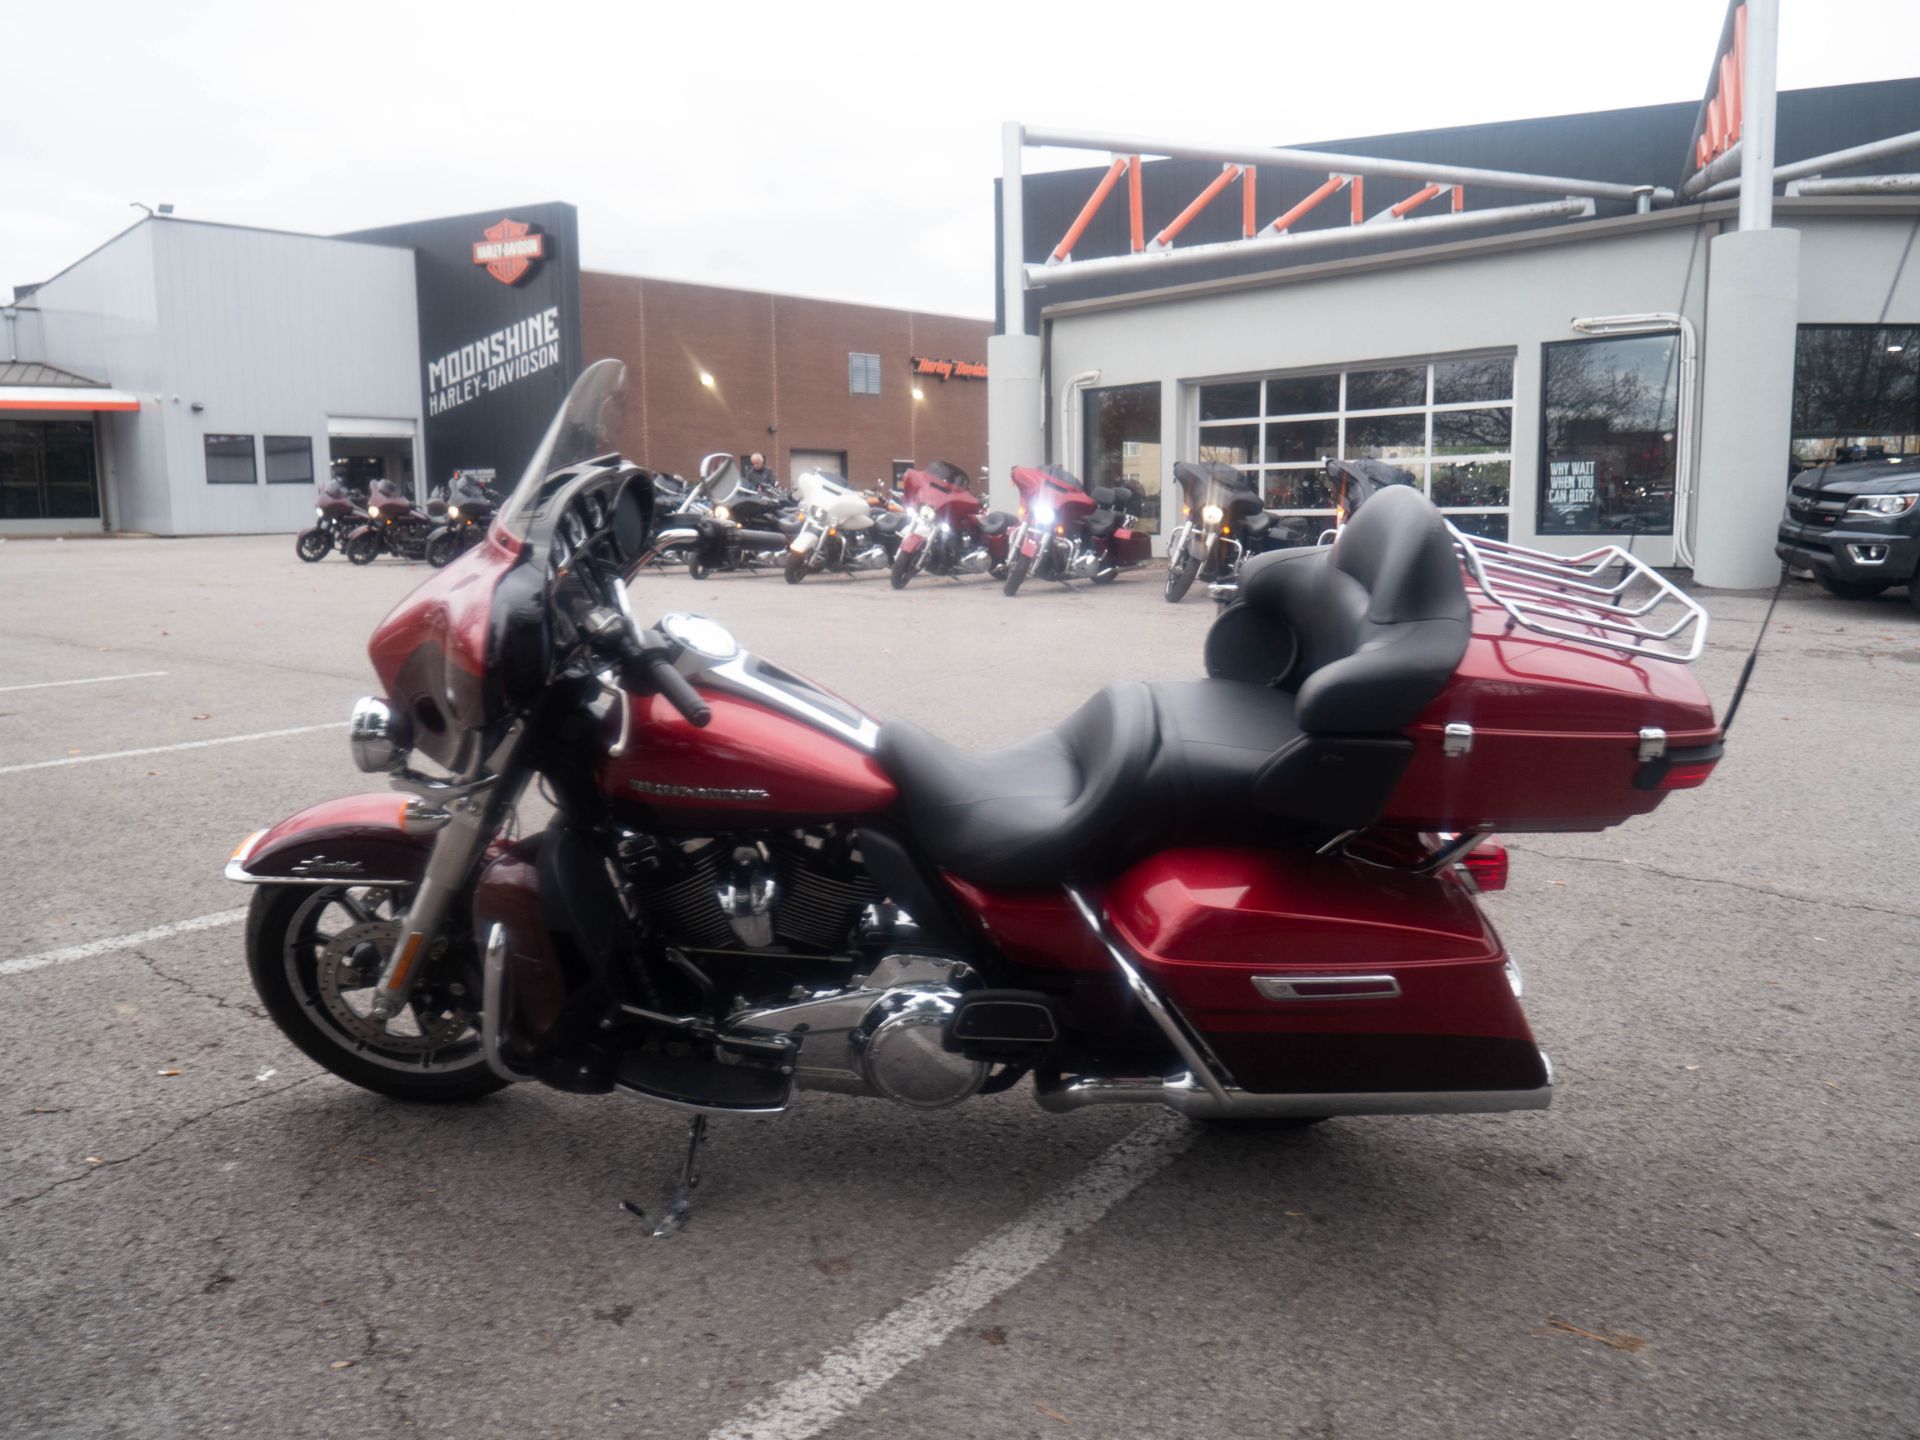 2018 Harley-Davidson Ultra Limited in Franklin, Tennessee - Photo 17